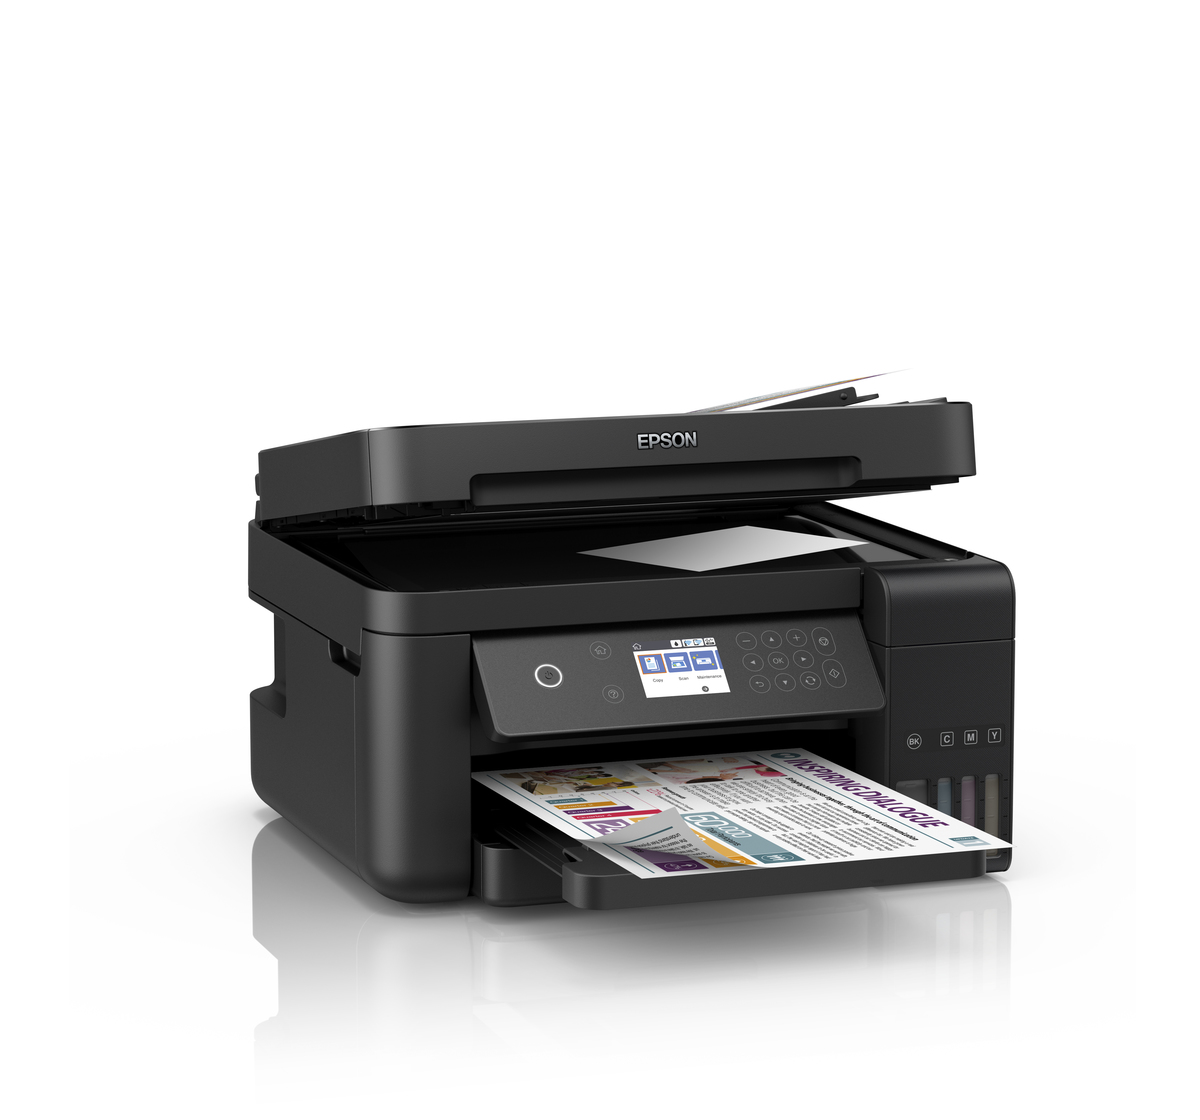 C11cg20501 Epson L6170 Wi Fi Duplex All In One Ink Tank Printer With Adf Mực In Liên Tục 2045